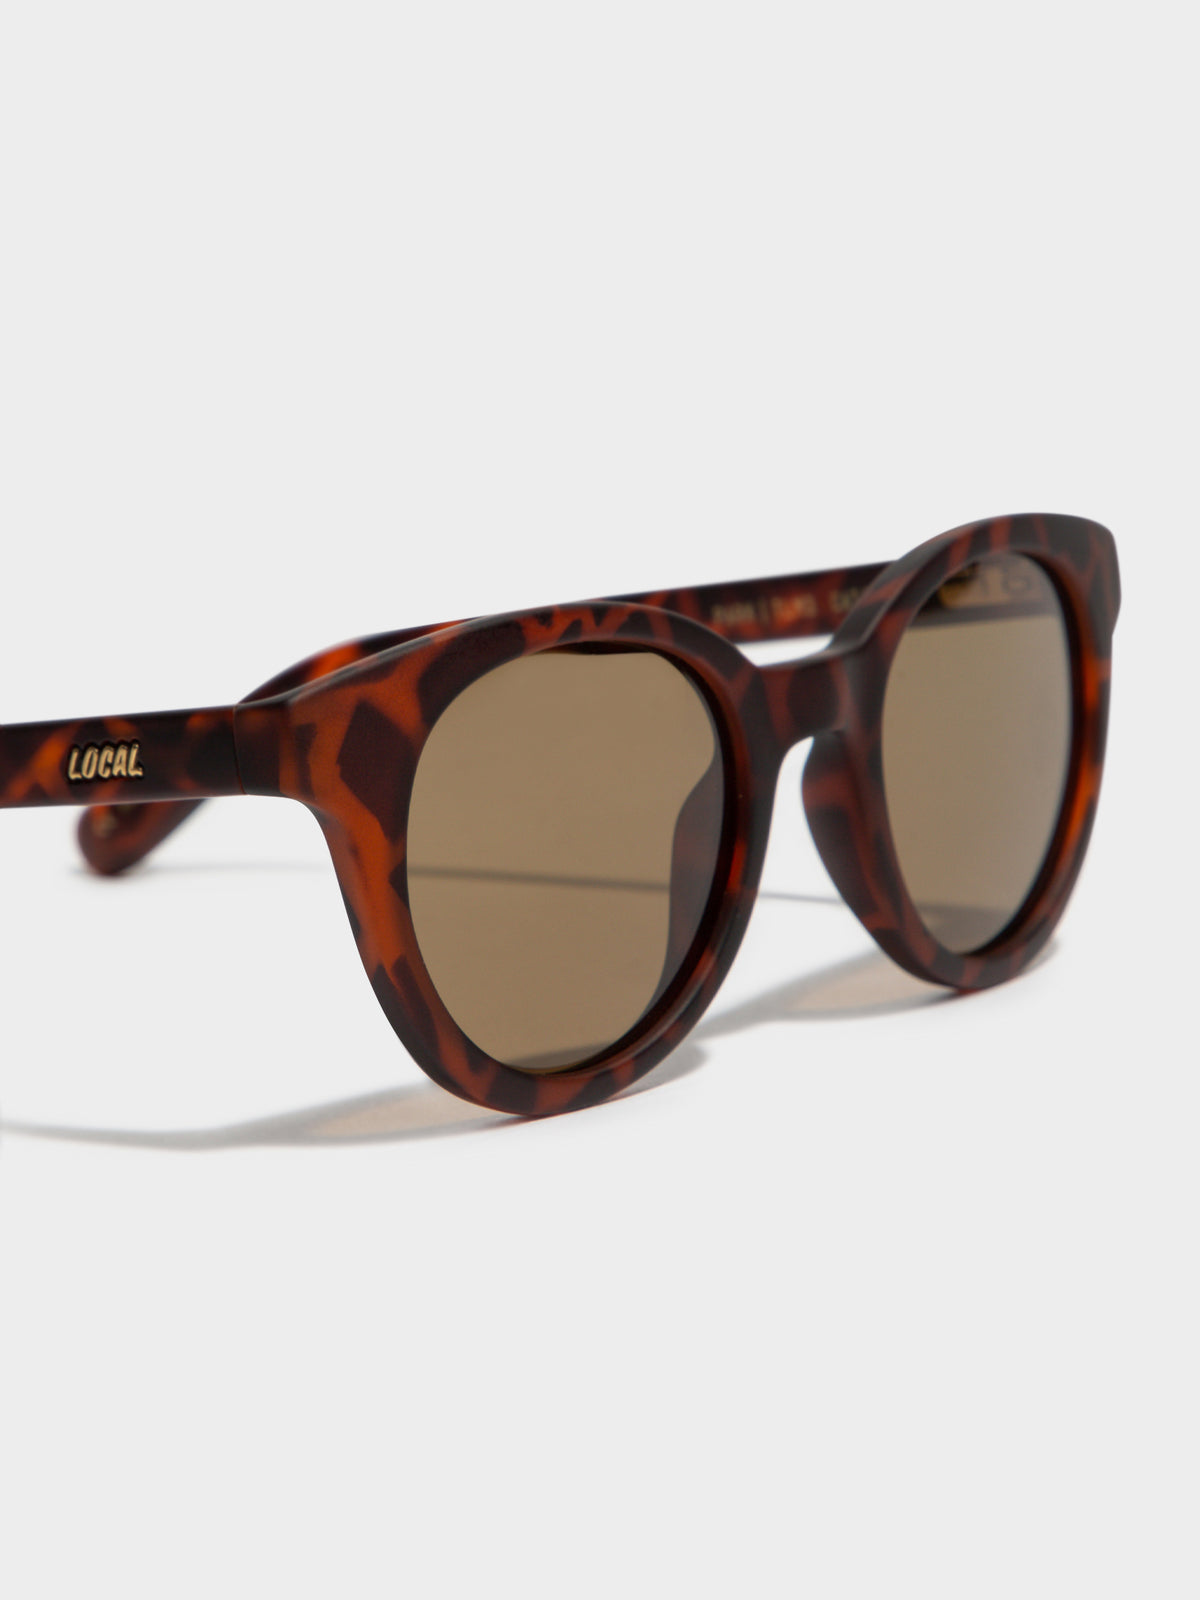 Park TLM3 Polished Sunglasses in Tortoise Shell